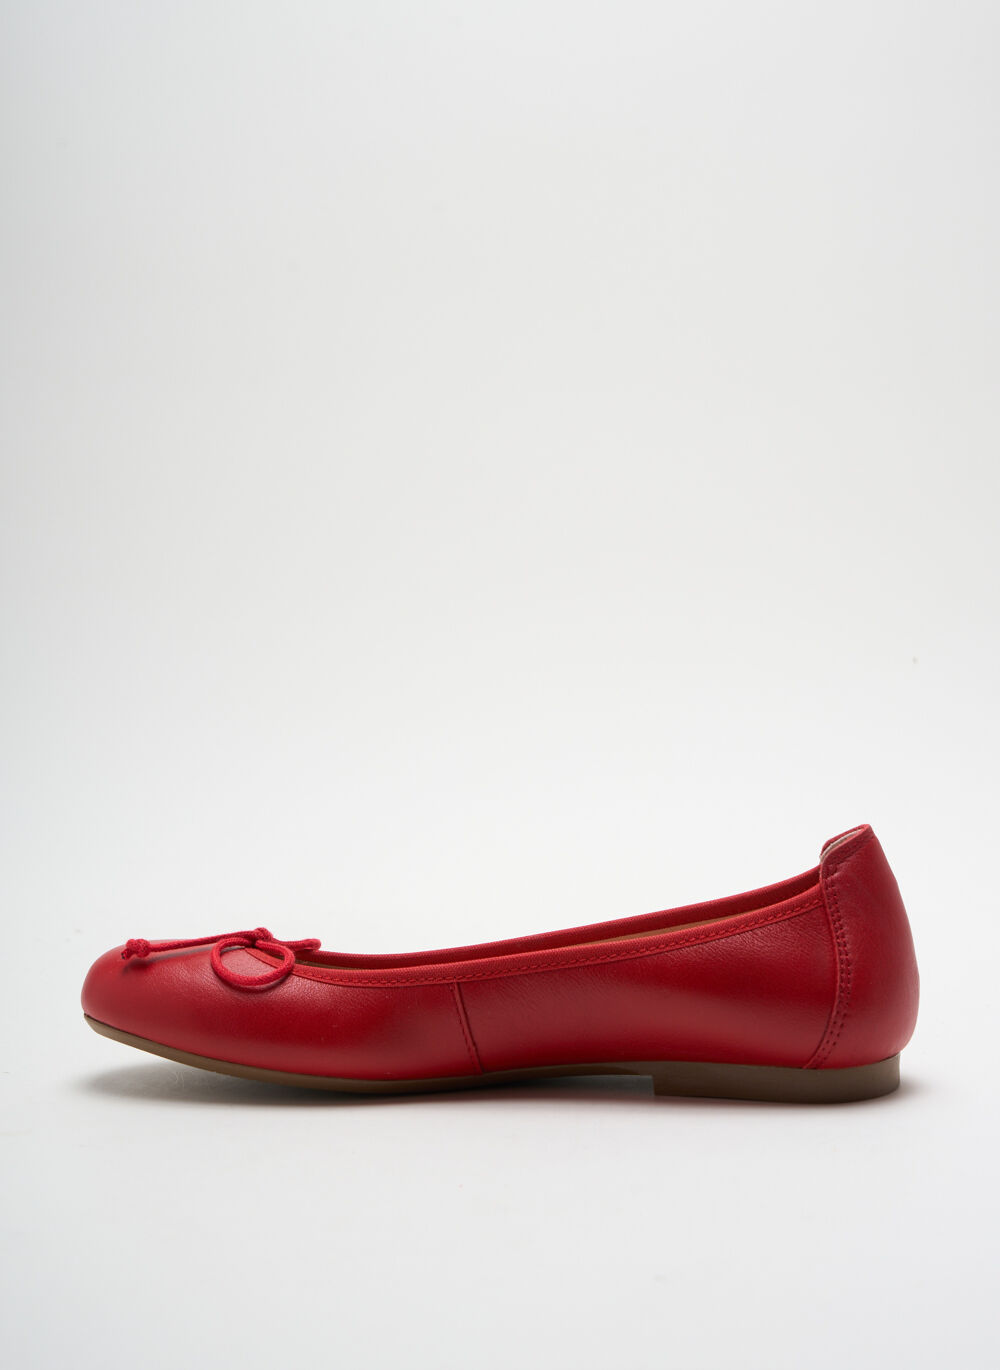 Ballerines fille Acebos rouge taille : 36 Vtements